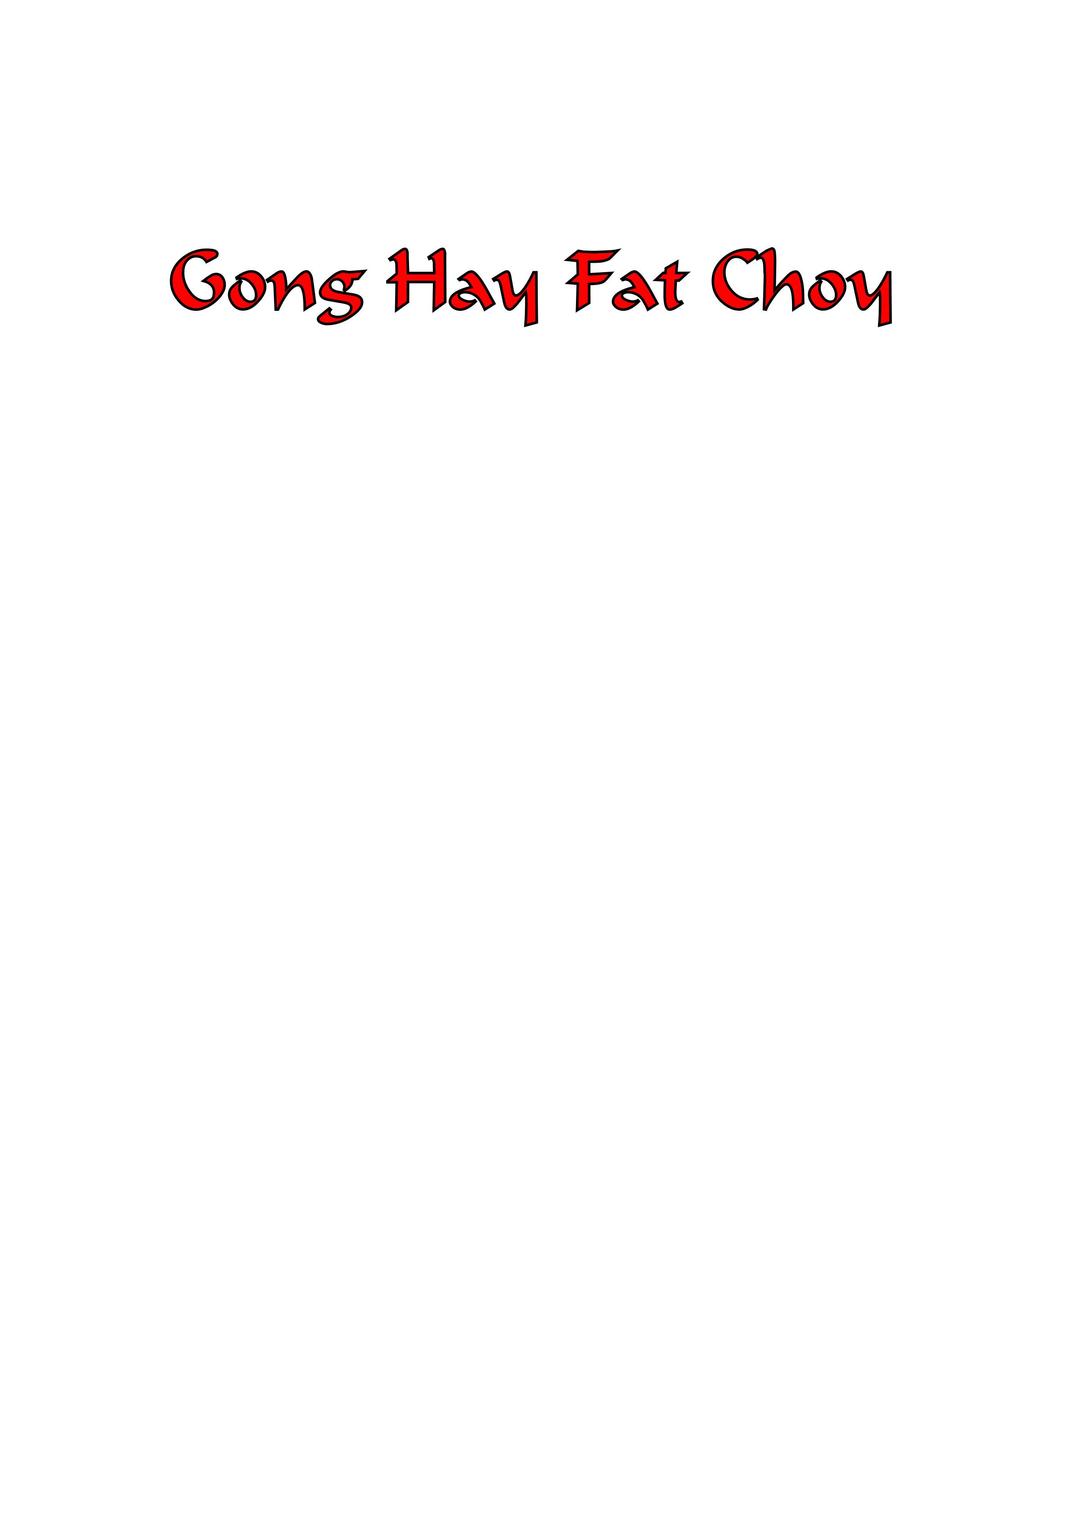 Gong Hay Fat Choy png transparent